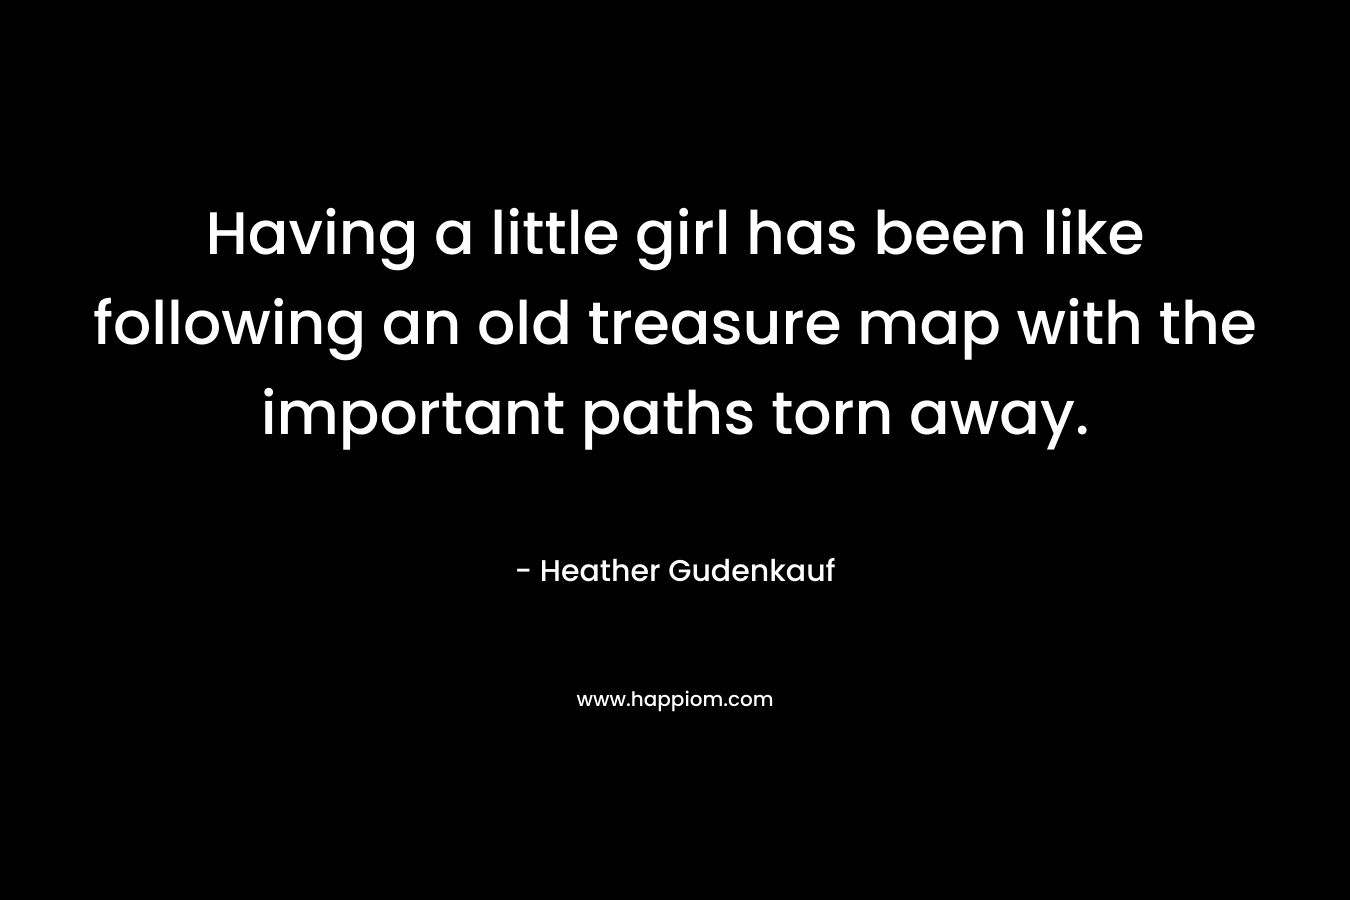 Having a little girl has been like following an old treasure map with the important paths torn away.